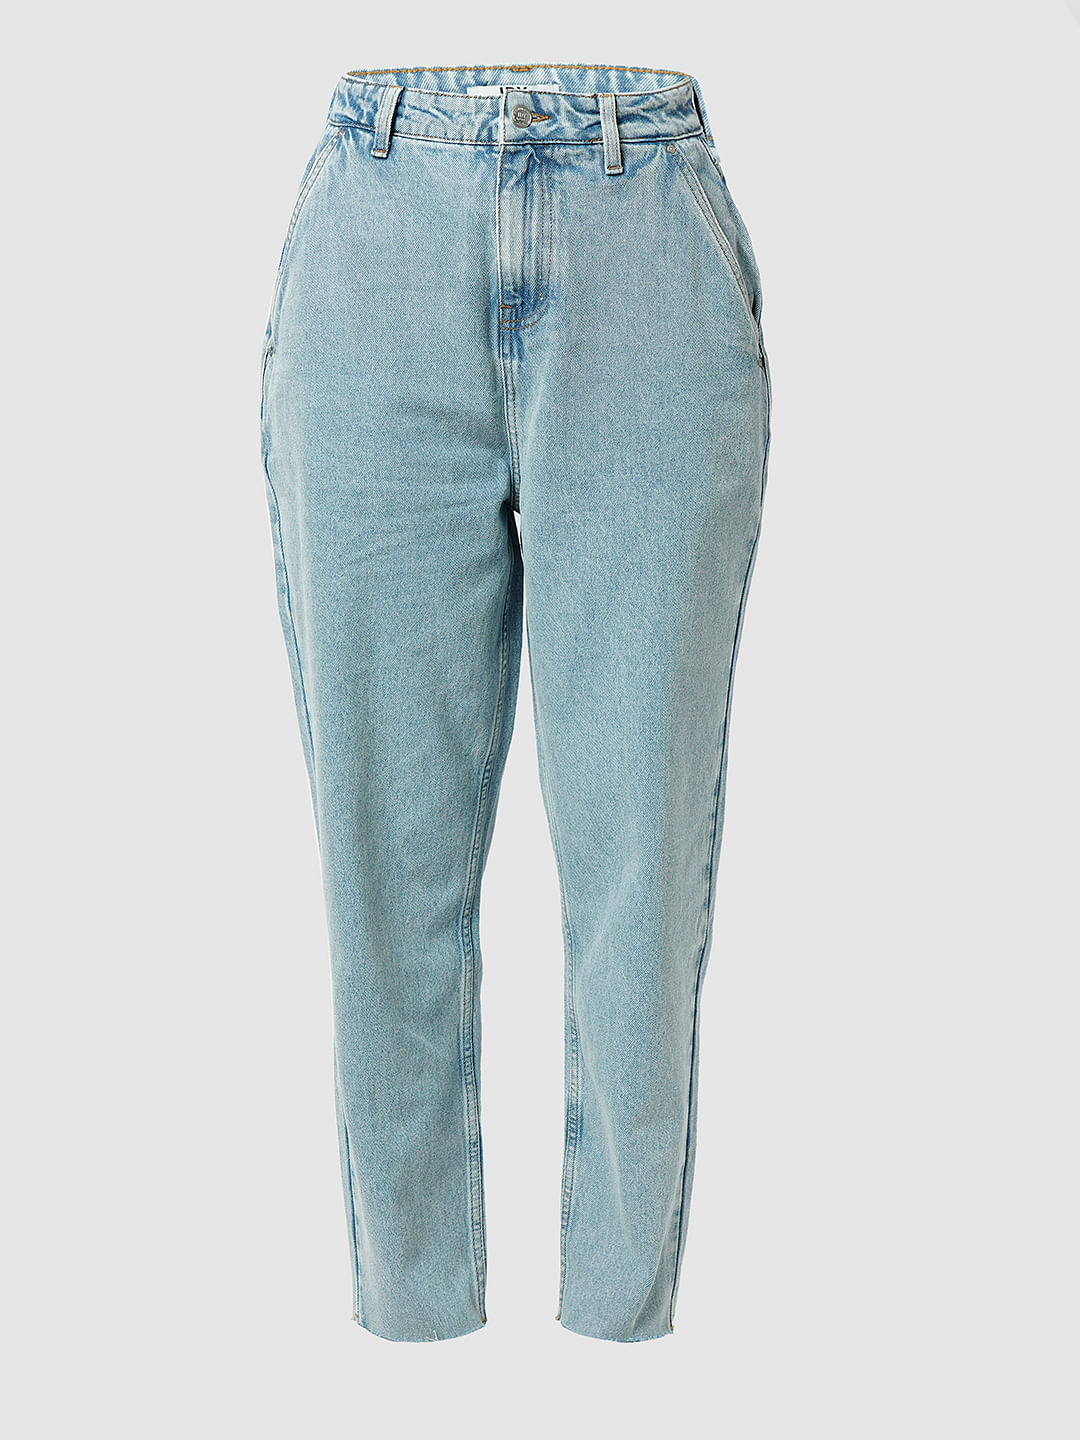 Buy Paige Women Light Blue Straight Ankle-Length Denim Jeans Online -  773904 | The Collective